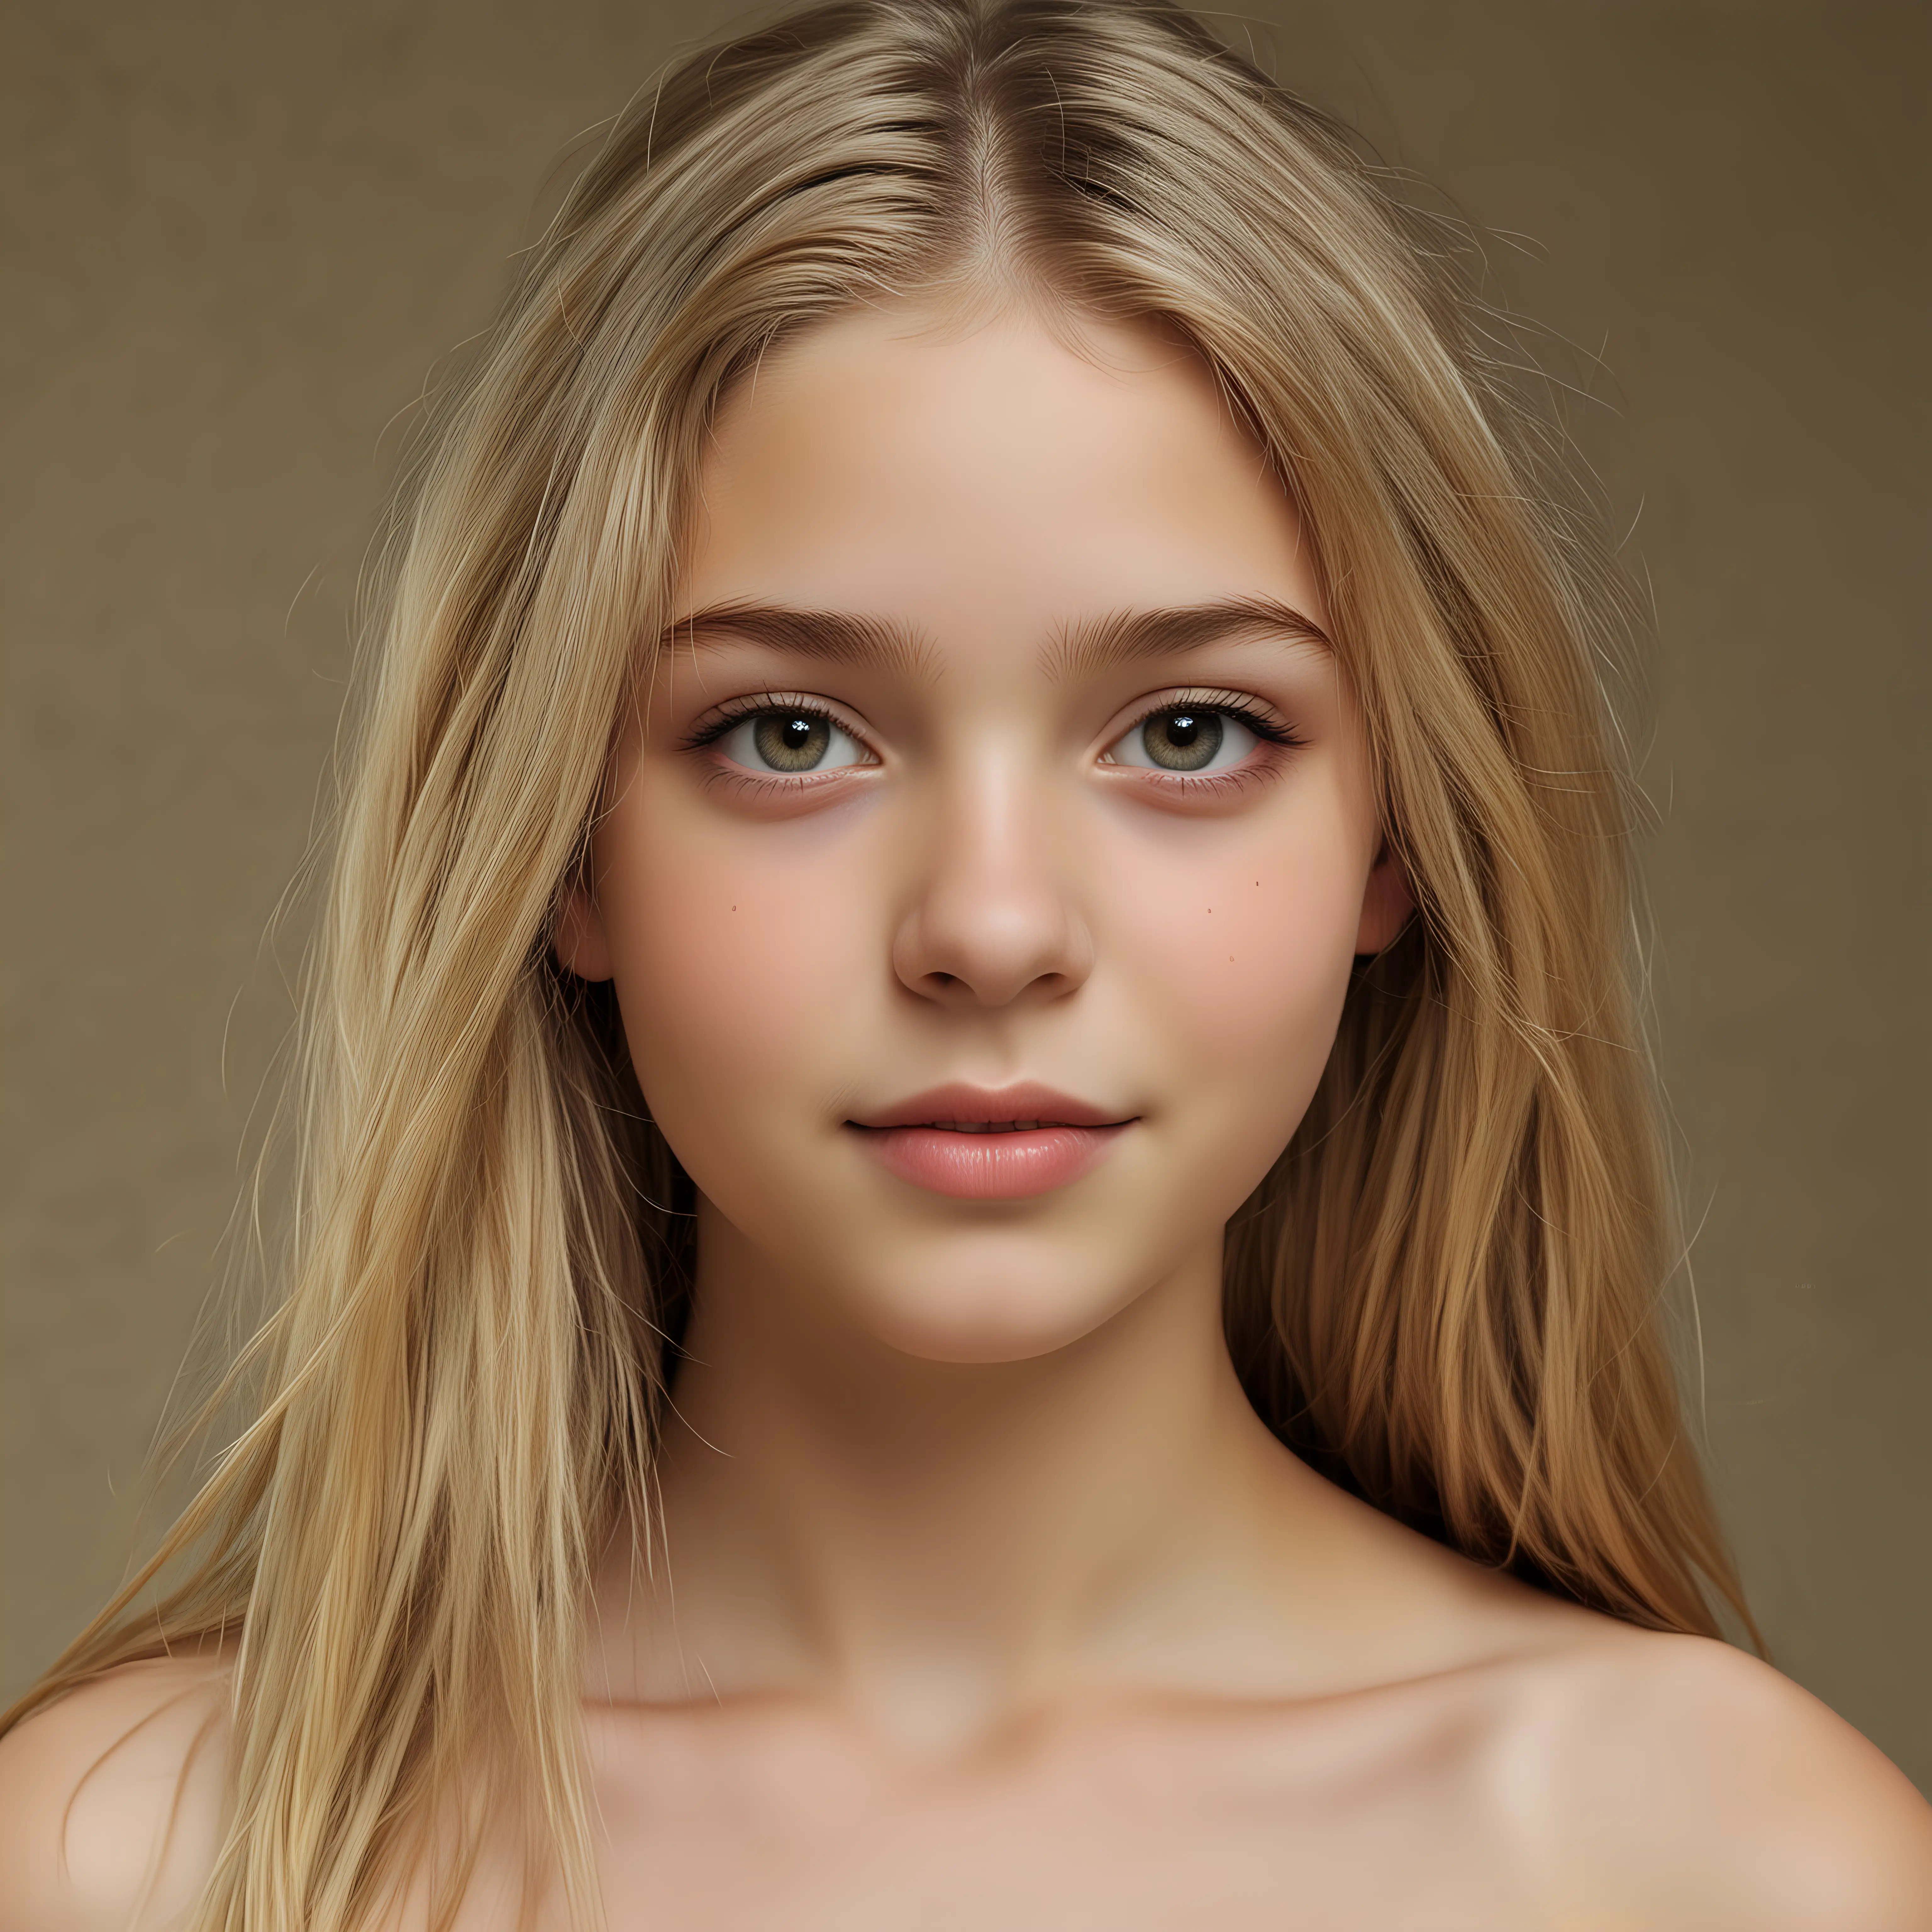 Maisie de Krassel, (14 years old) teen model, head and torso, ethereal, narrow face, loving smile, smooth straight hair that frames her face BREAK hazel eyes